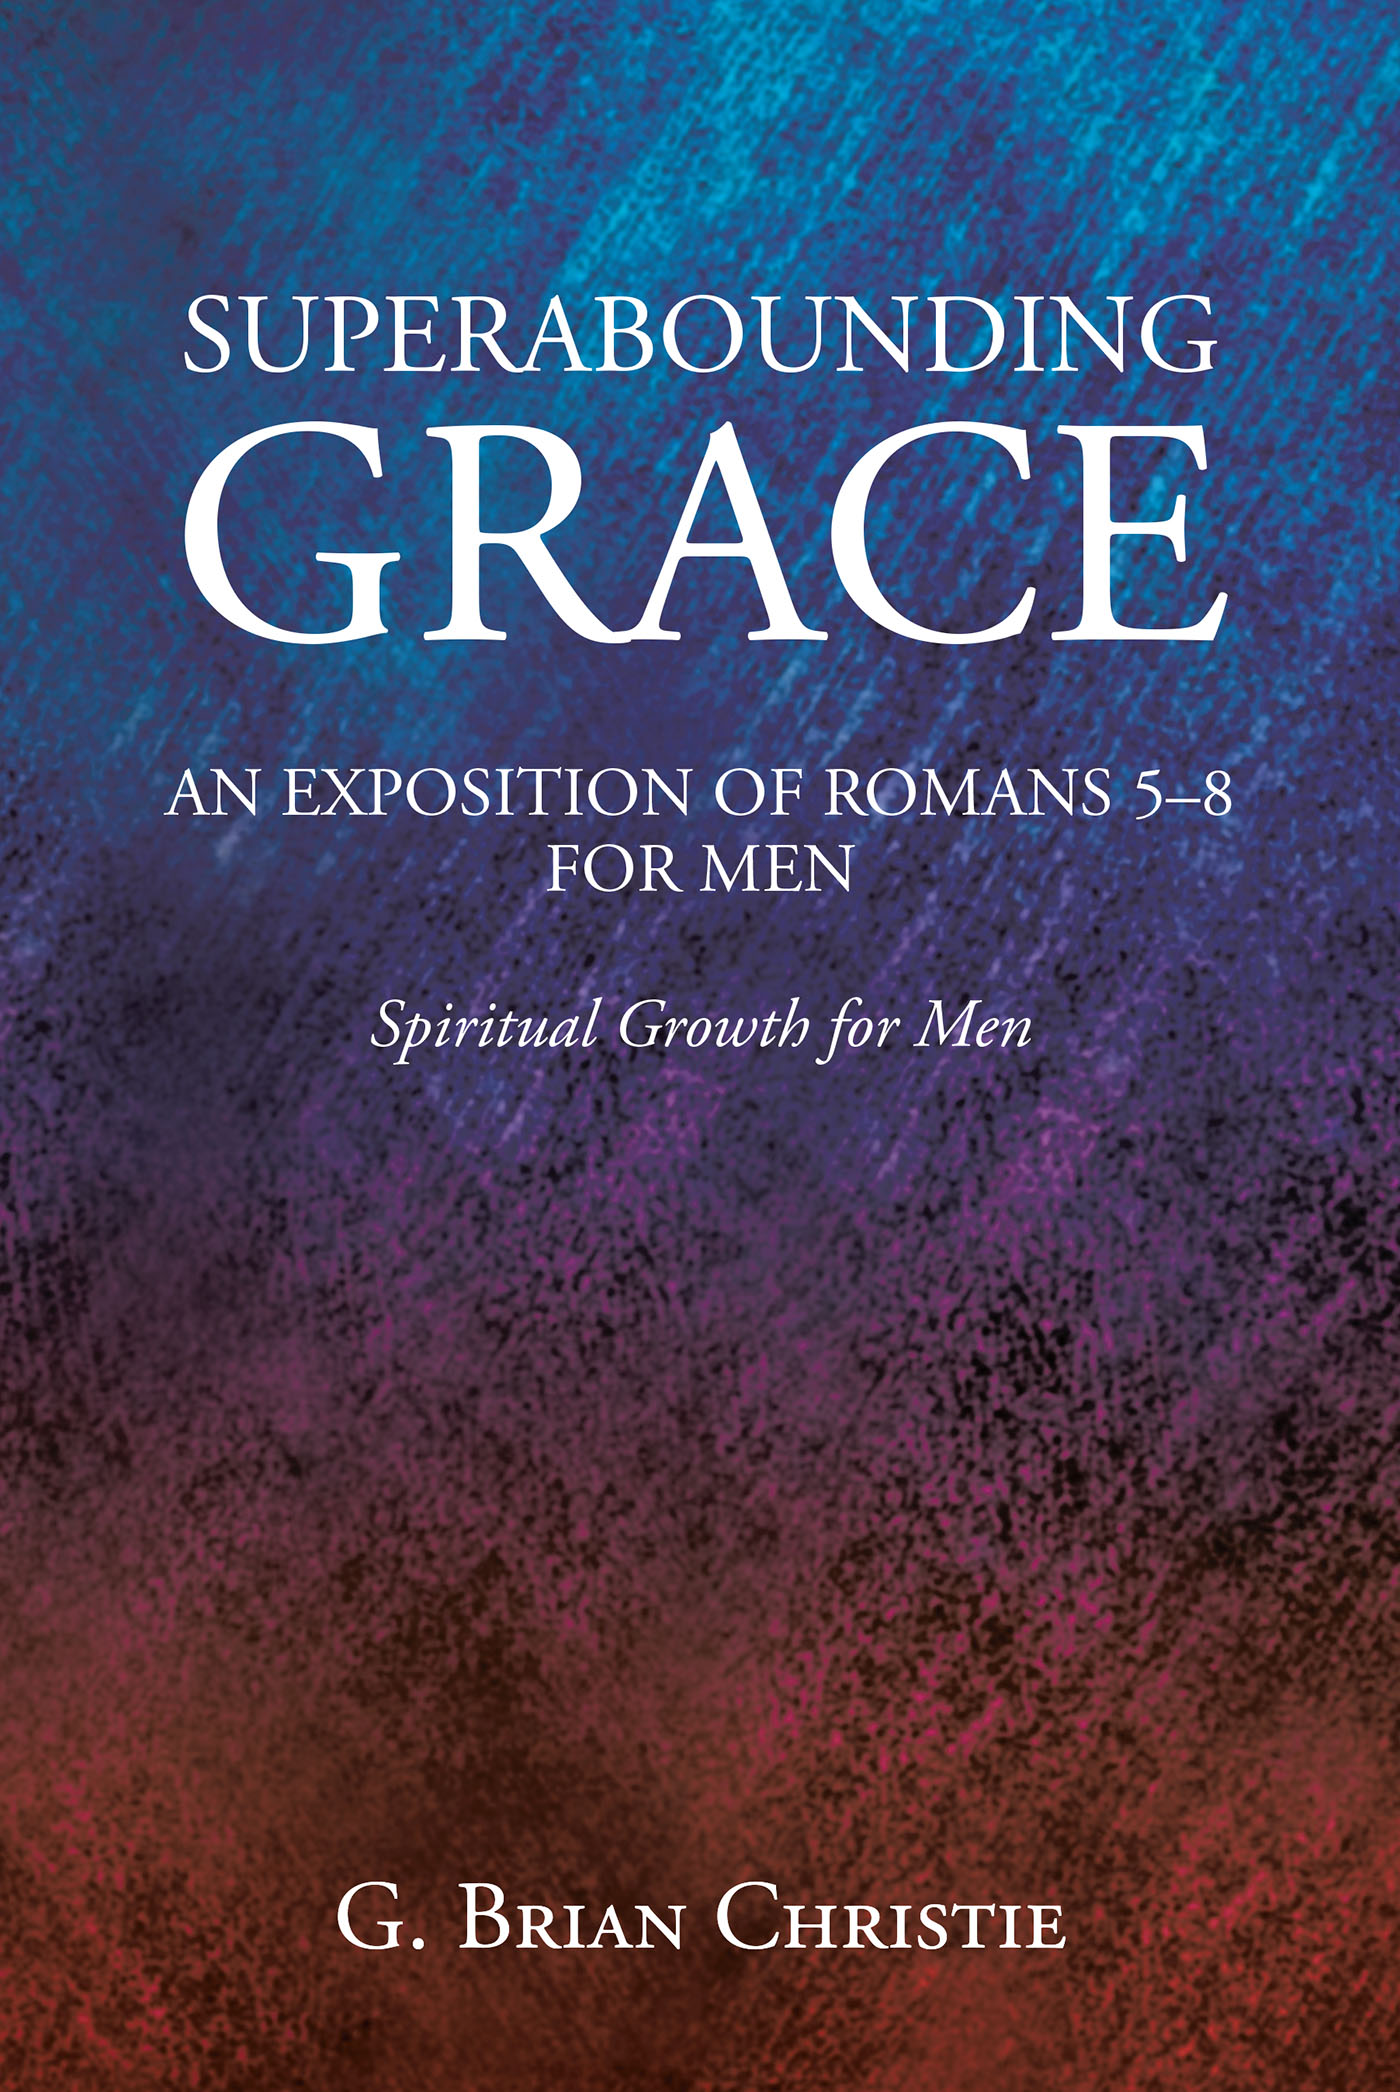 G. Brian Christie’s Nnewly Released “SUPERABOUNDING GRACE AN EXPOSITION OF ROMANS 5-8 FOR MEN: Spiritual Growth for Men” Fosters Spiritual Maturity and Growth